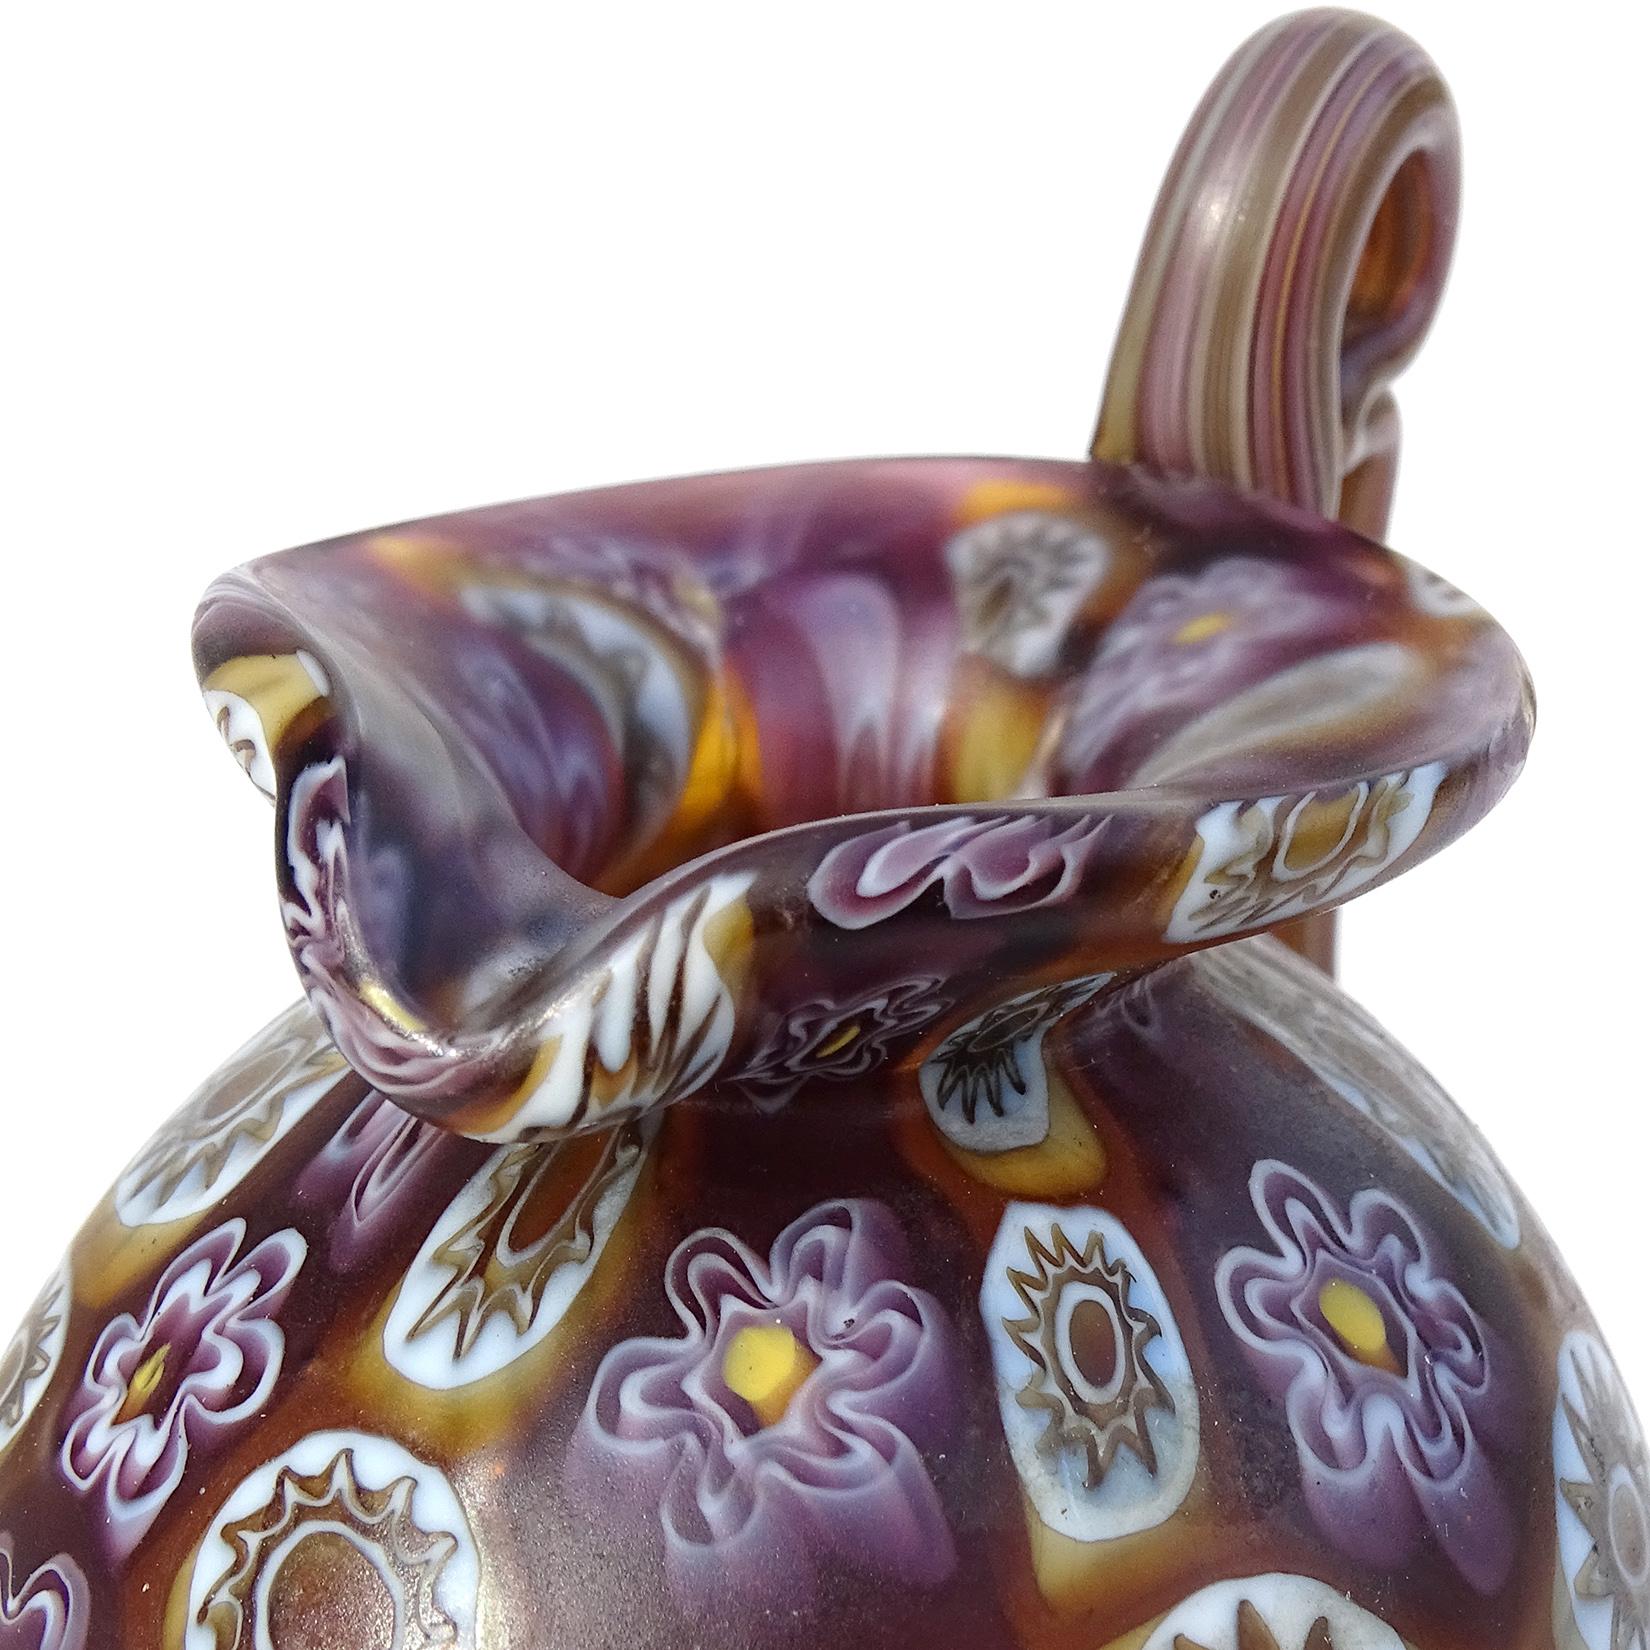 Beautiful antique Murano hand blown Millefiori Murrina flower mosaic Italian art glass decorative ornate handle cabinet vase / pitcher. Documented to the Fratelli Toso company, circa 1900-1920. The vase has an early design and color combination. The